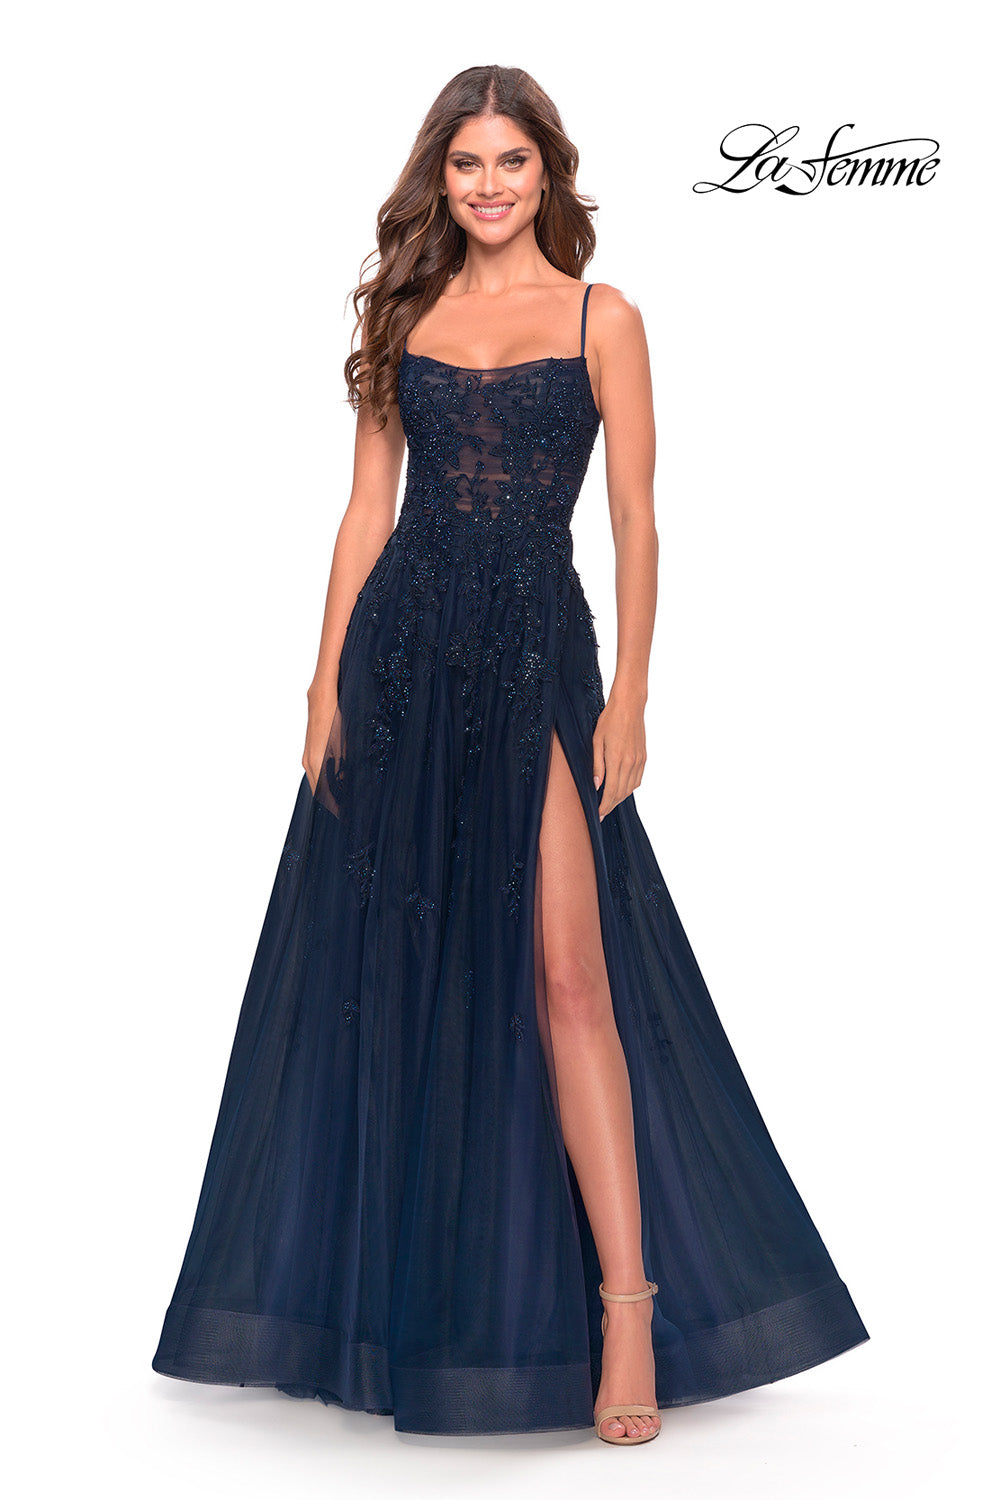 La Femme 31381 prom dress images.  La Femme 31381 is available in these colors: Navy, Red.